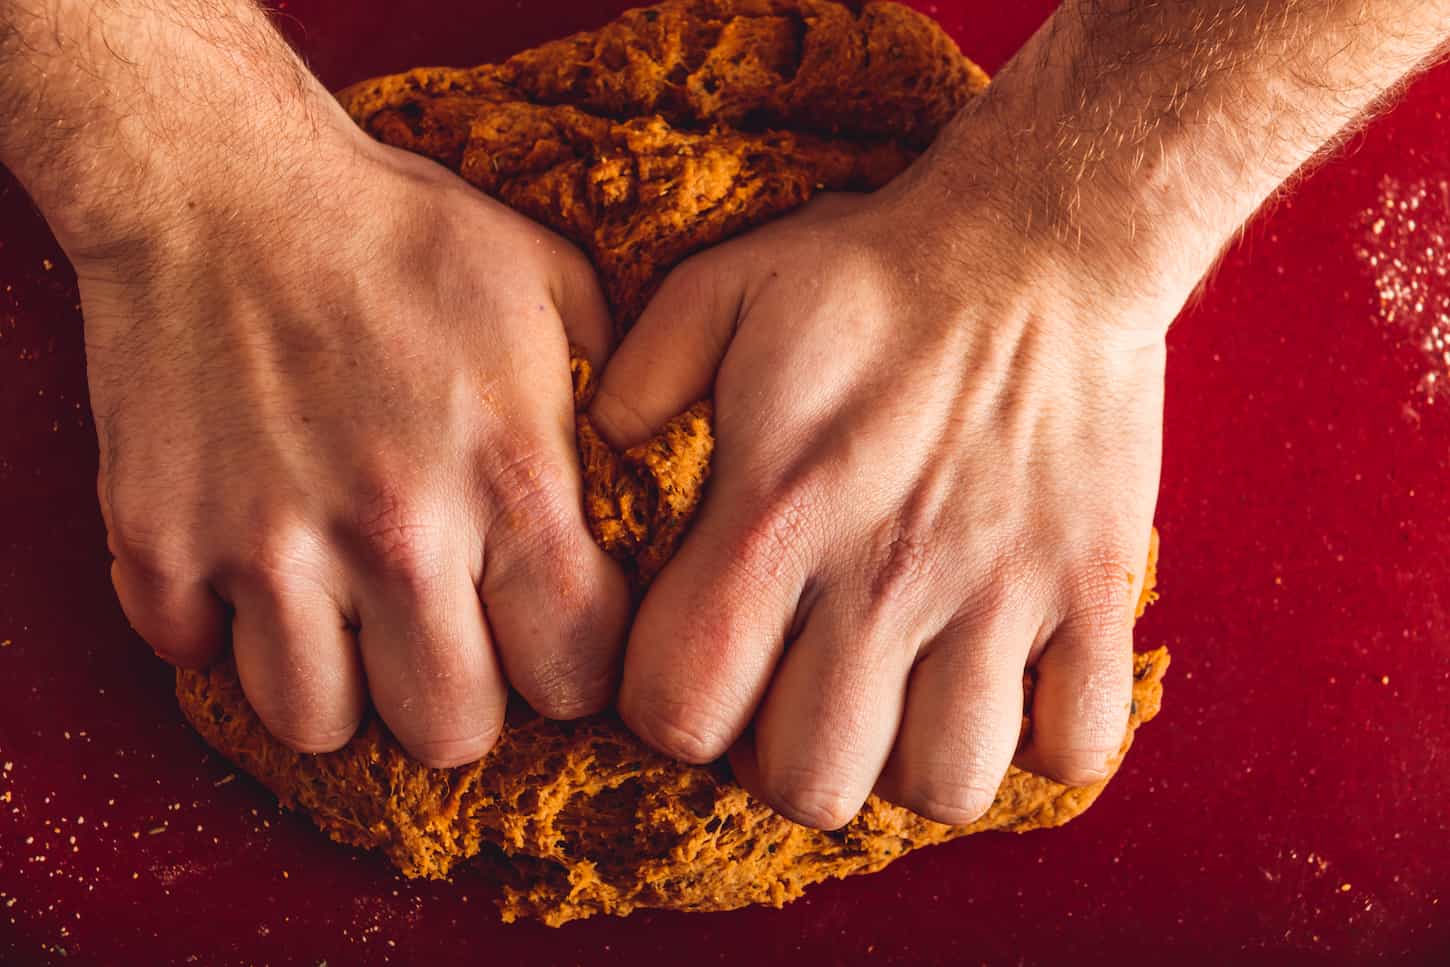 An image focused on a man's hands while kneading seitan dough on a red table.